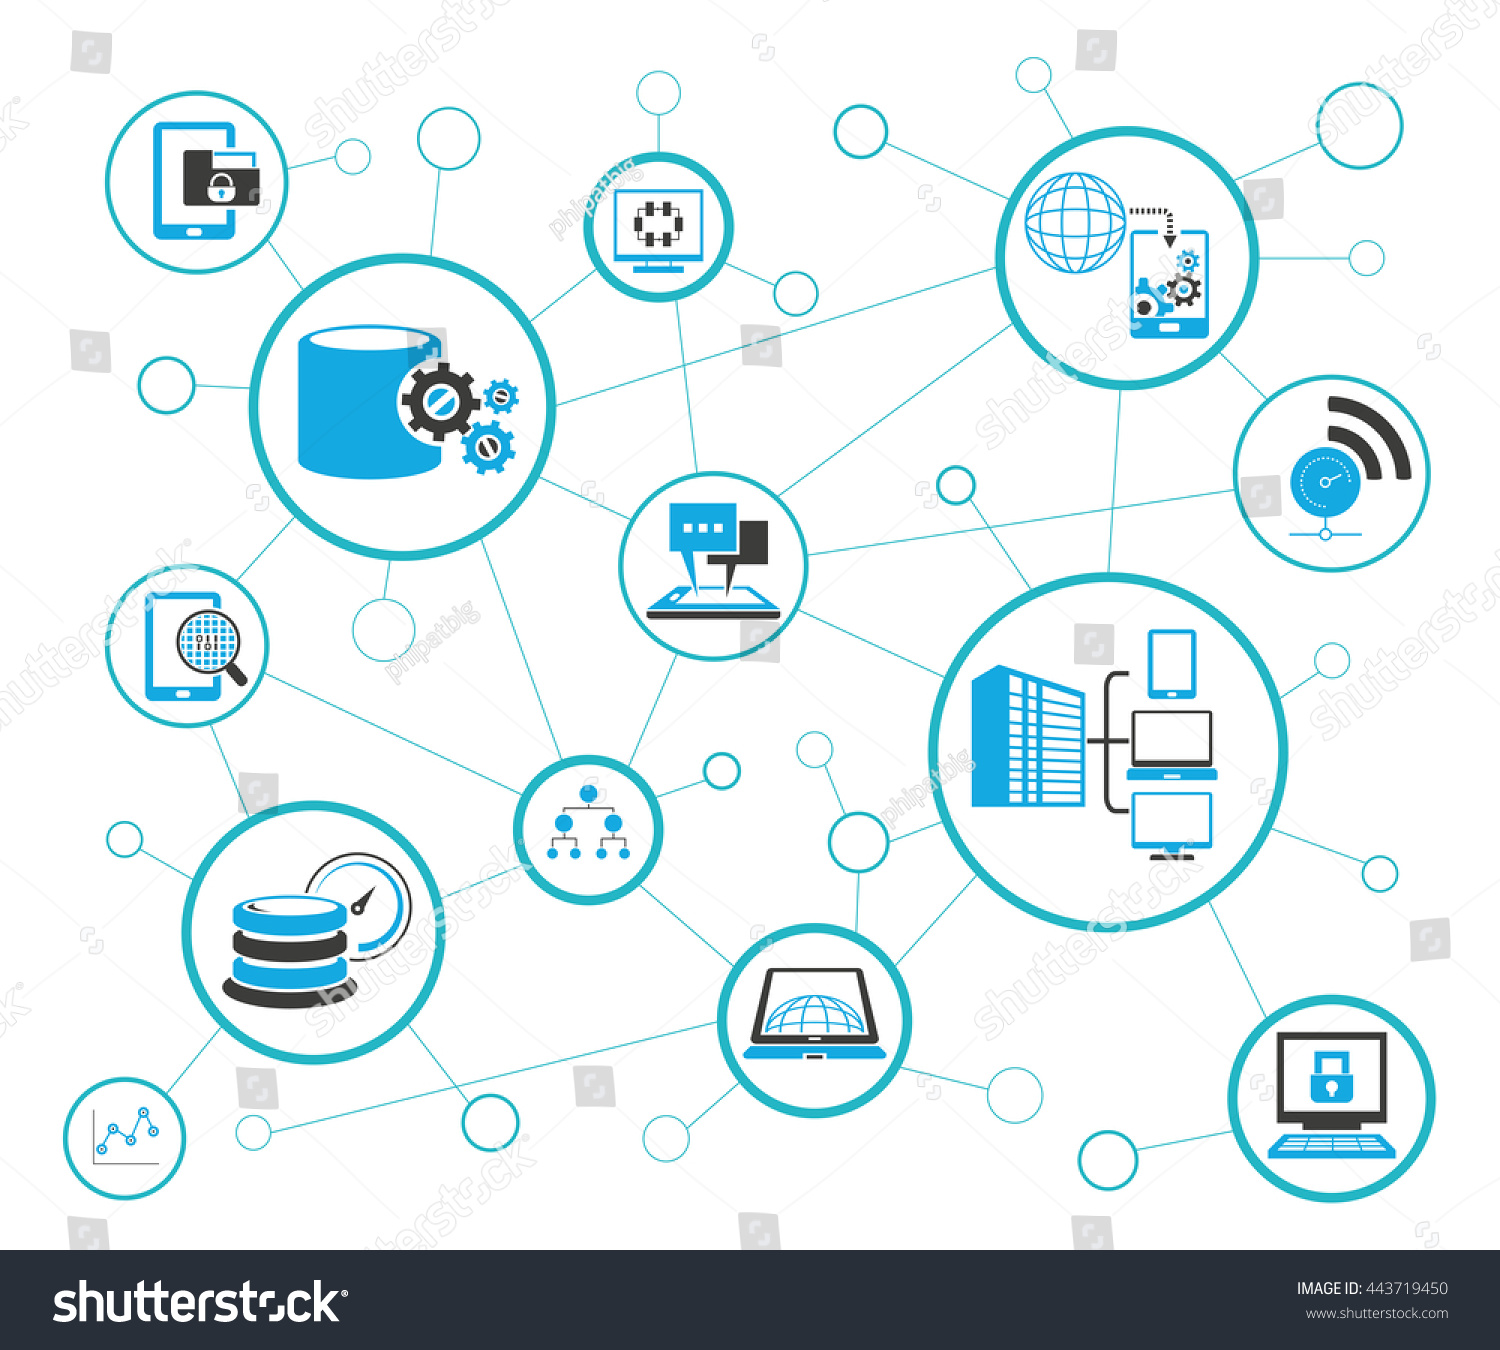 stock vector analytics data icons and network diagram on white background information technology concept 443719450